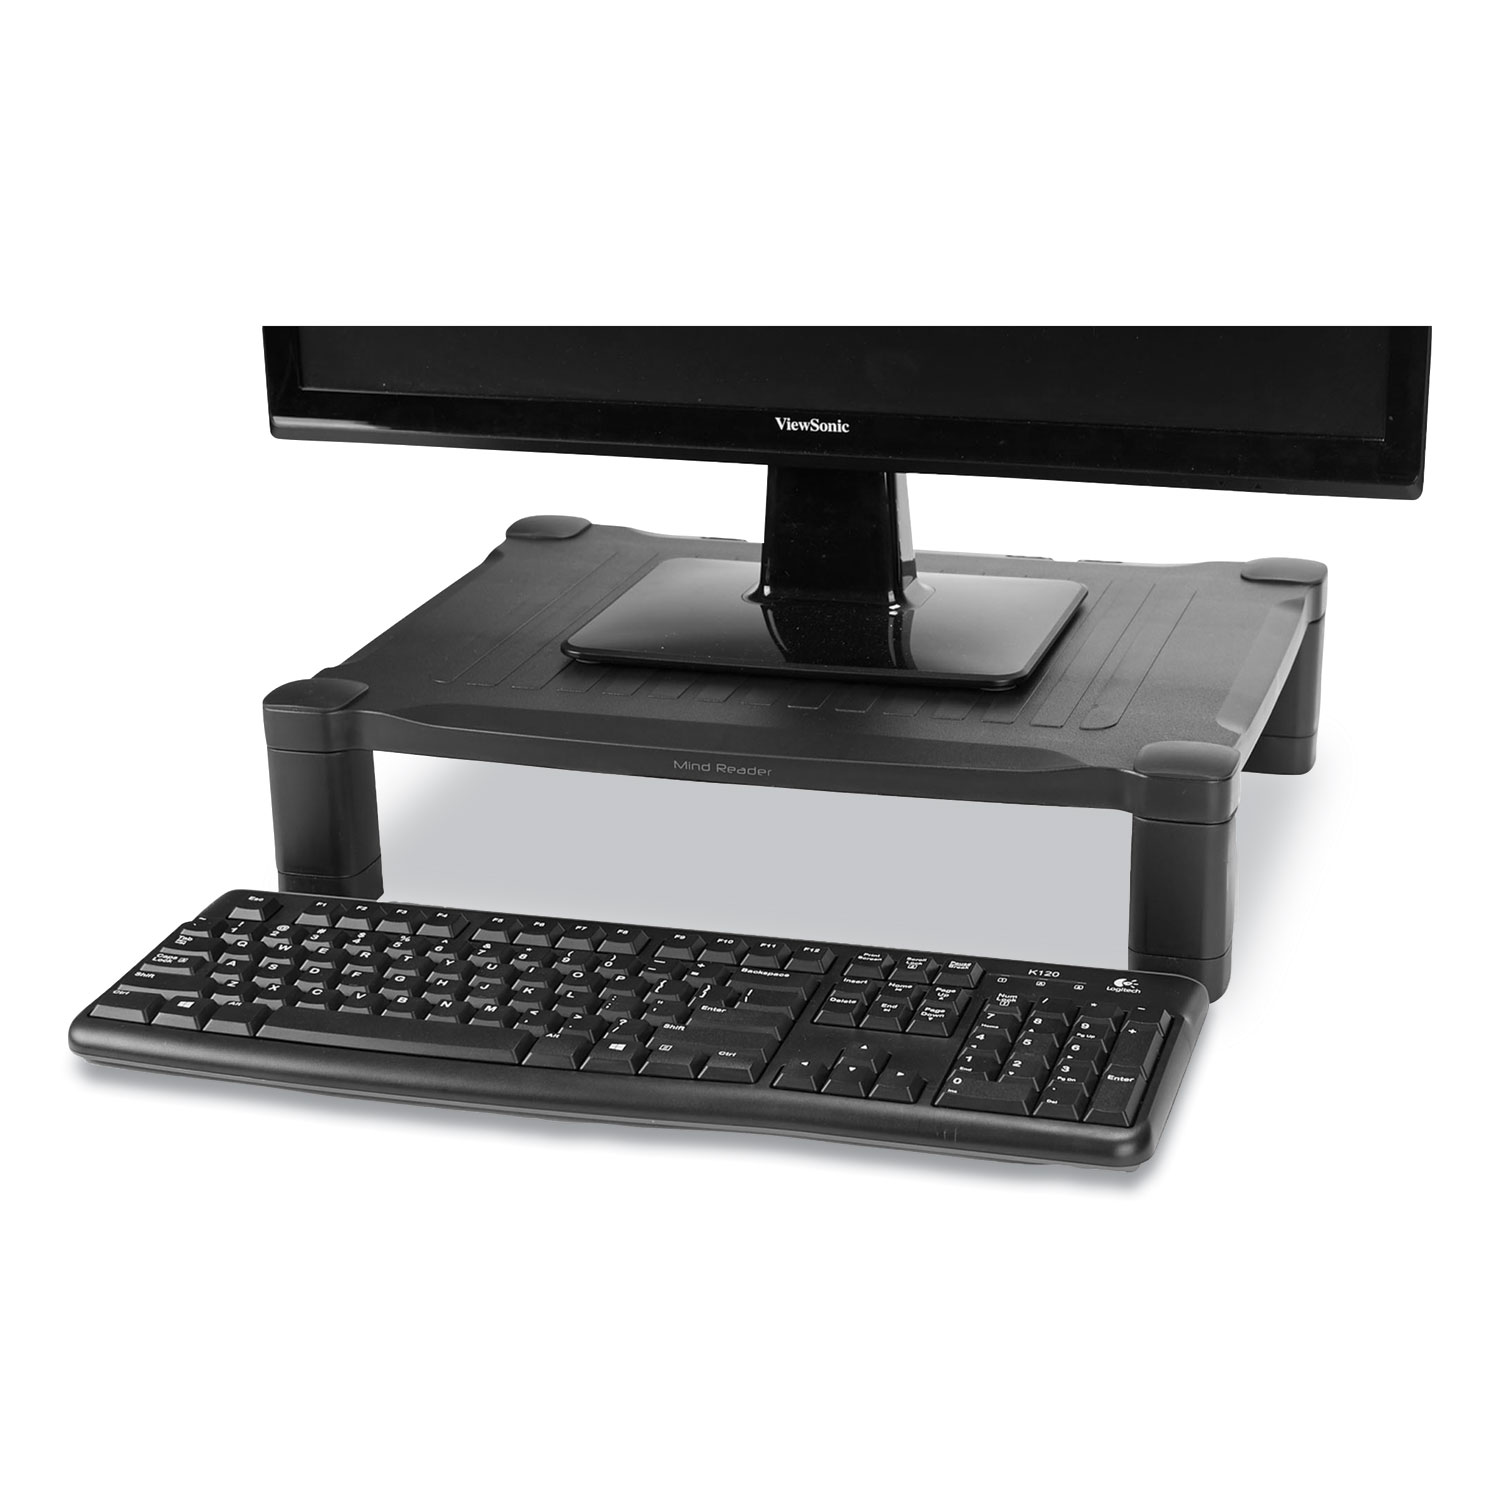 Mind Reader Adjustable Rectangular Monitor Stand, 17 x 13 x 3.75 to 5.75, Black, Supports 22 lbs